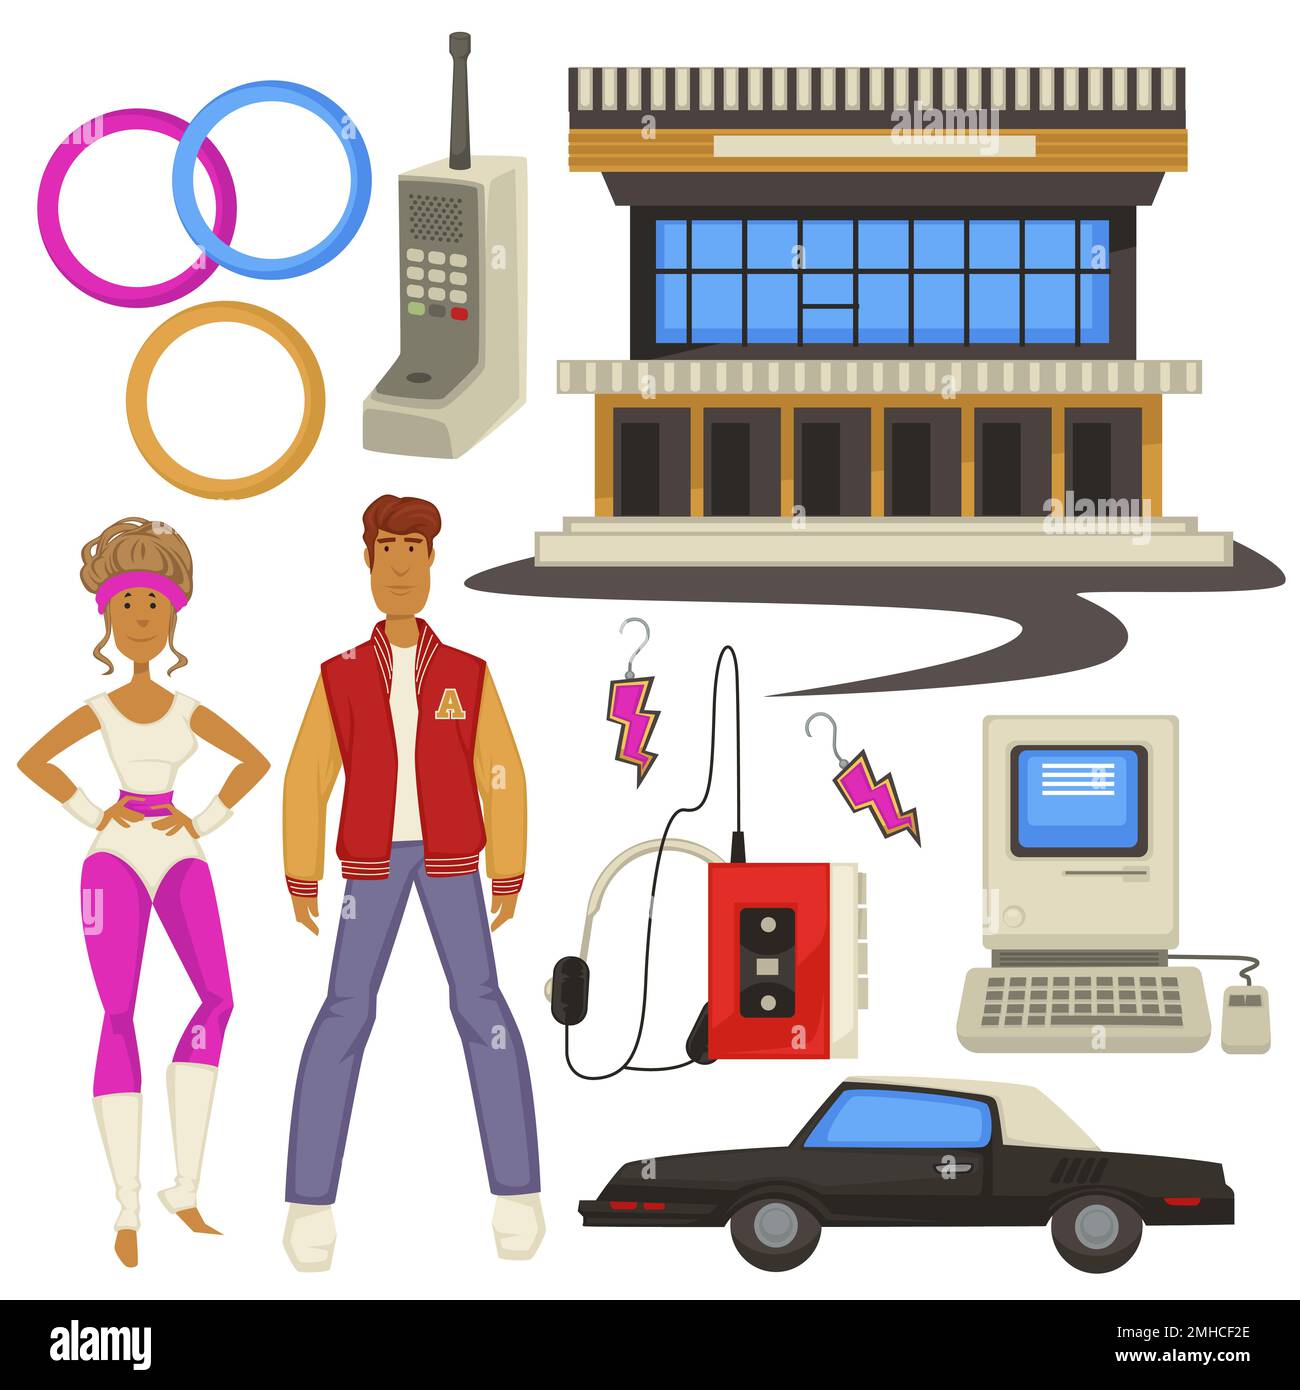 1980s style fashion and technologies, epoch symbols, man and woman Stock Vector